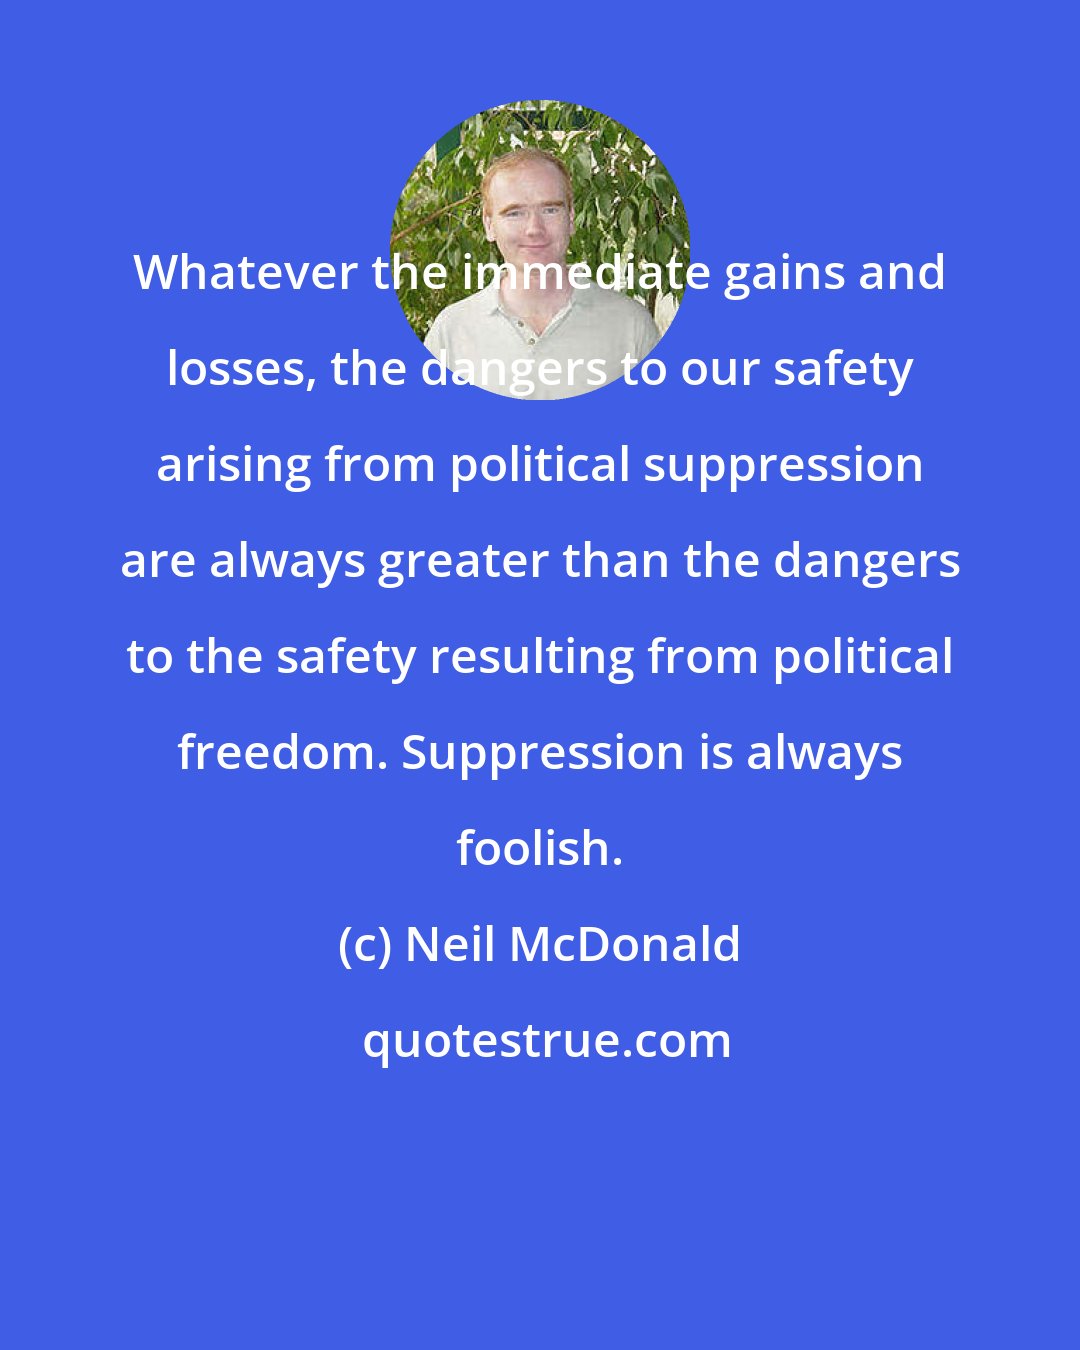 Neil McDonald: Whatever the immediate gains and losses, the dangers to our safety arising from political suppression are always greater than the dangers to the safety resulting from political freedom. Suppression is always foolish.